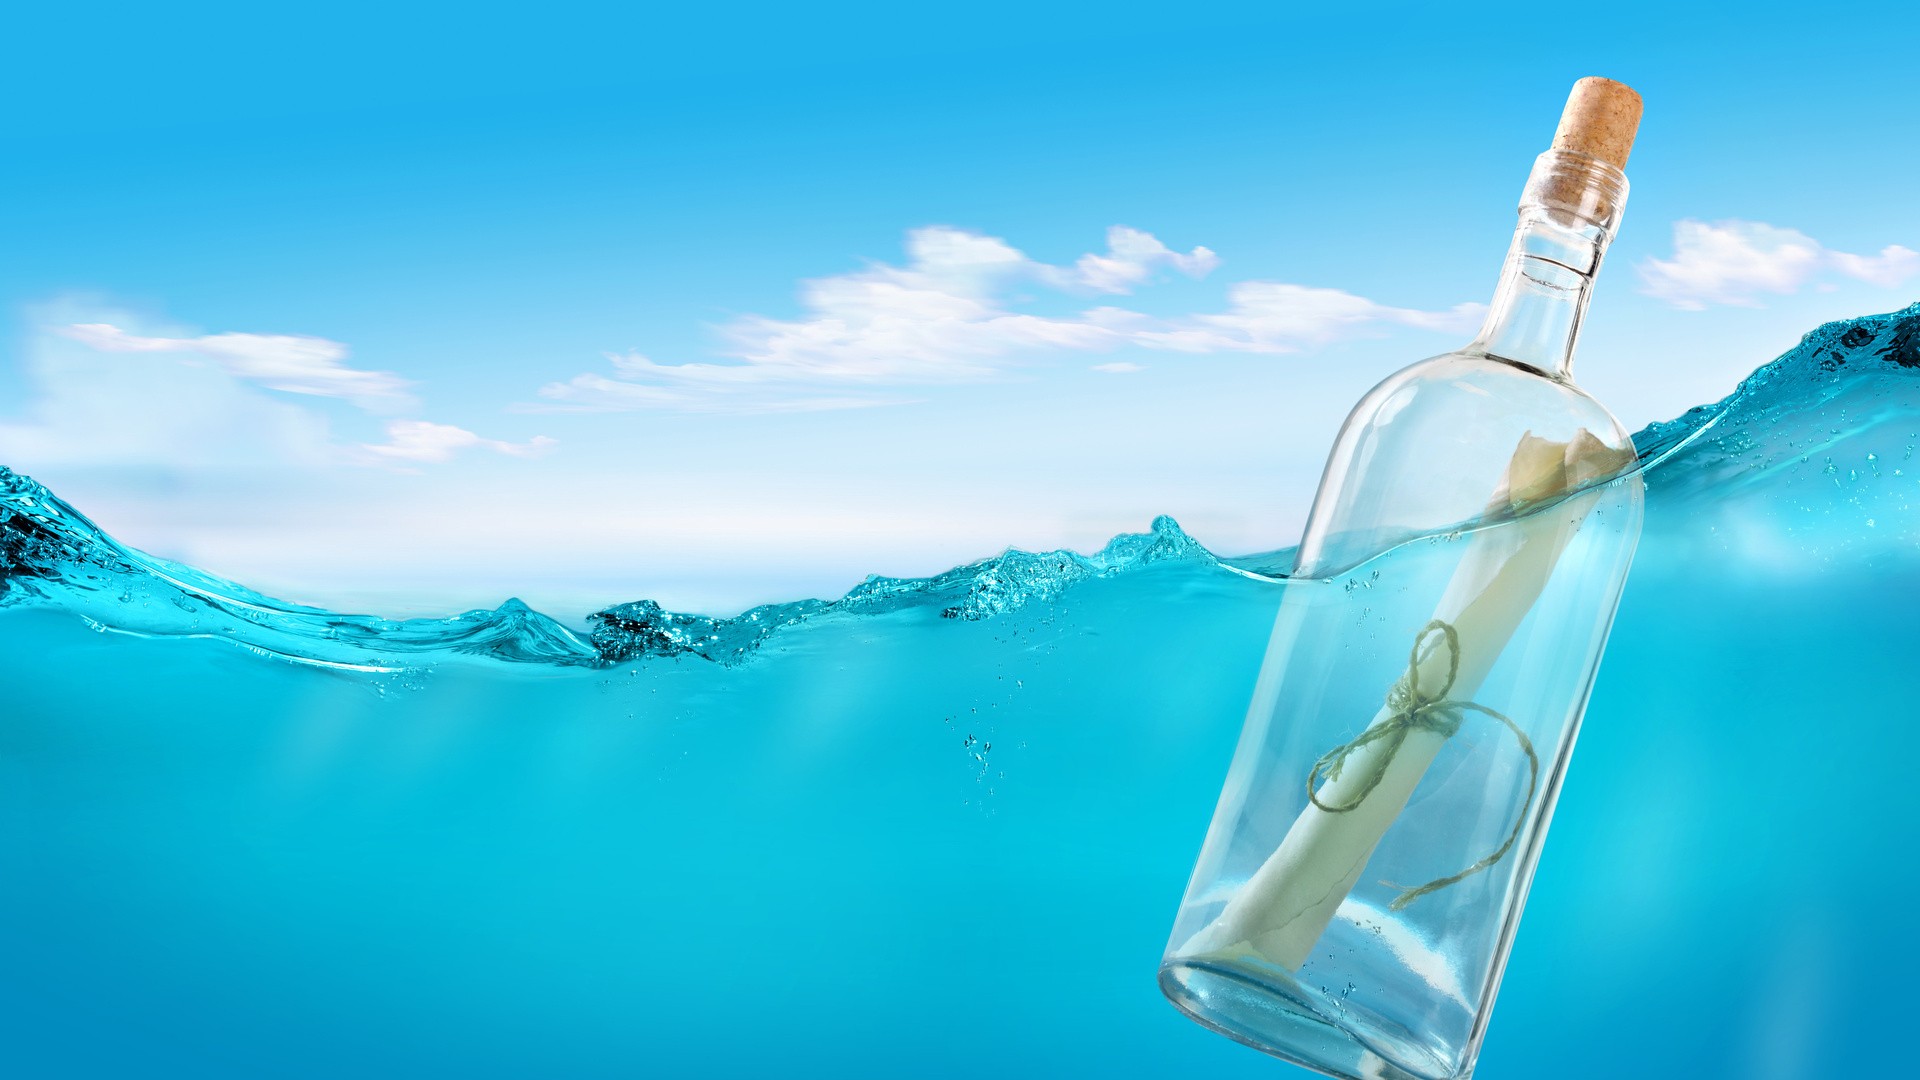 Bottle Letter Floating Wallpaper | Download cool HD wallpapers here.